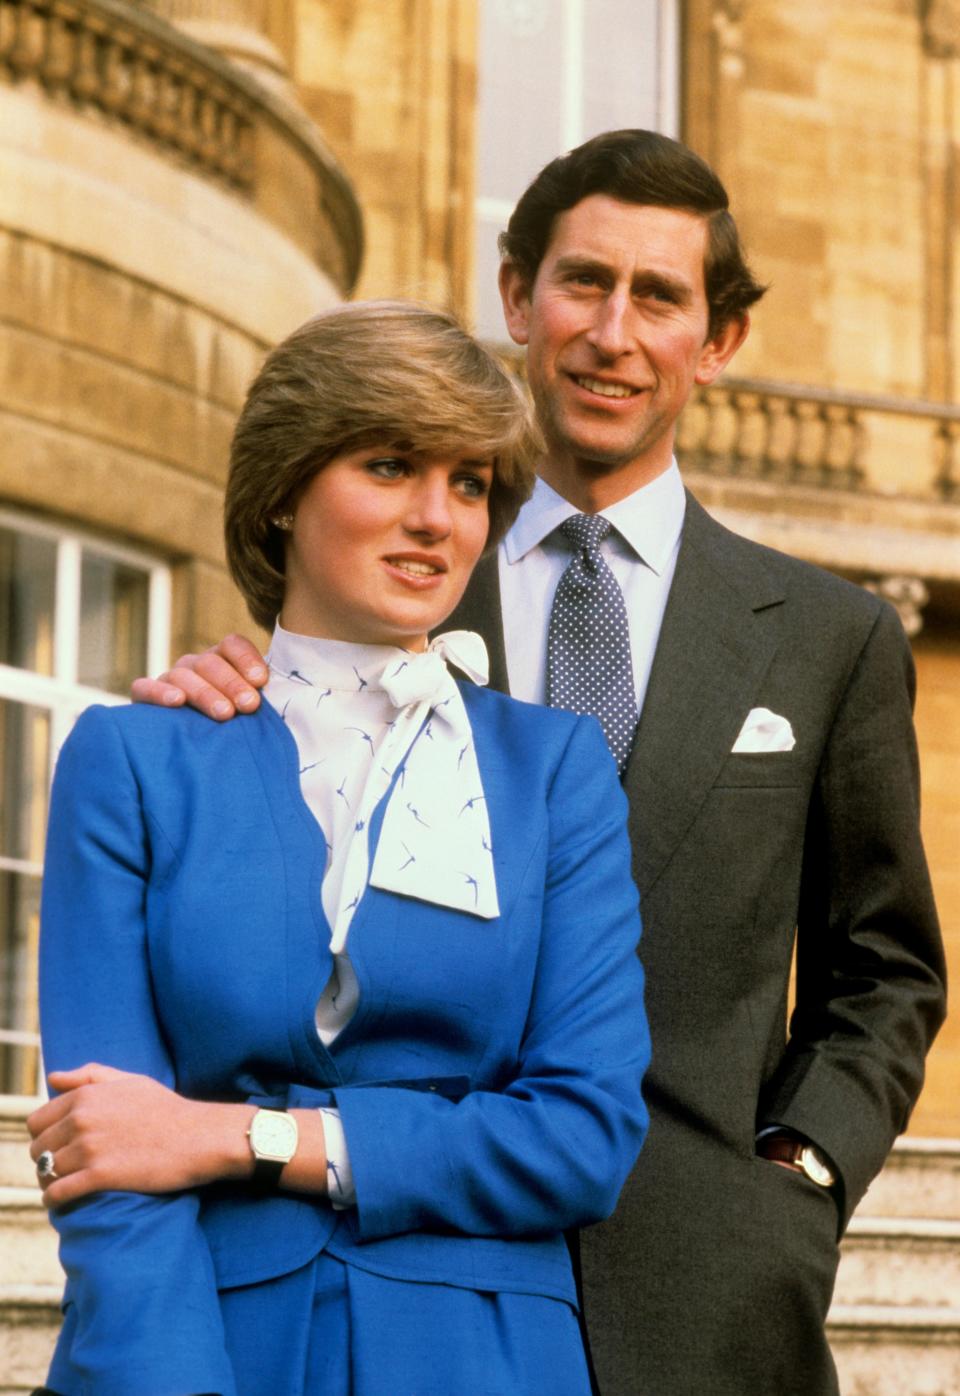 Then-Prince Charles and Princess Diana Spencer announce their engagement in 1981.